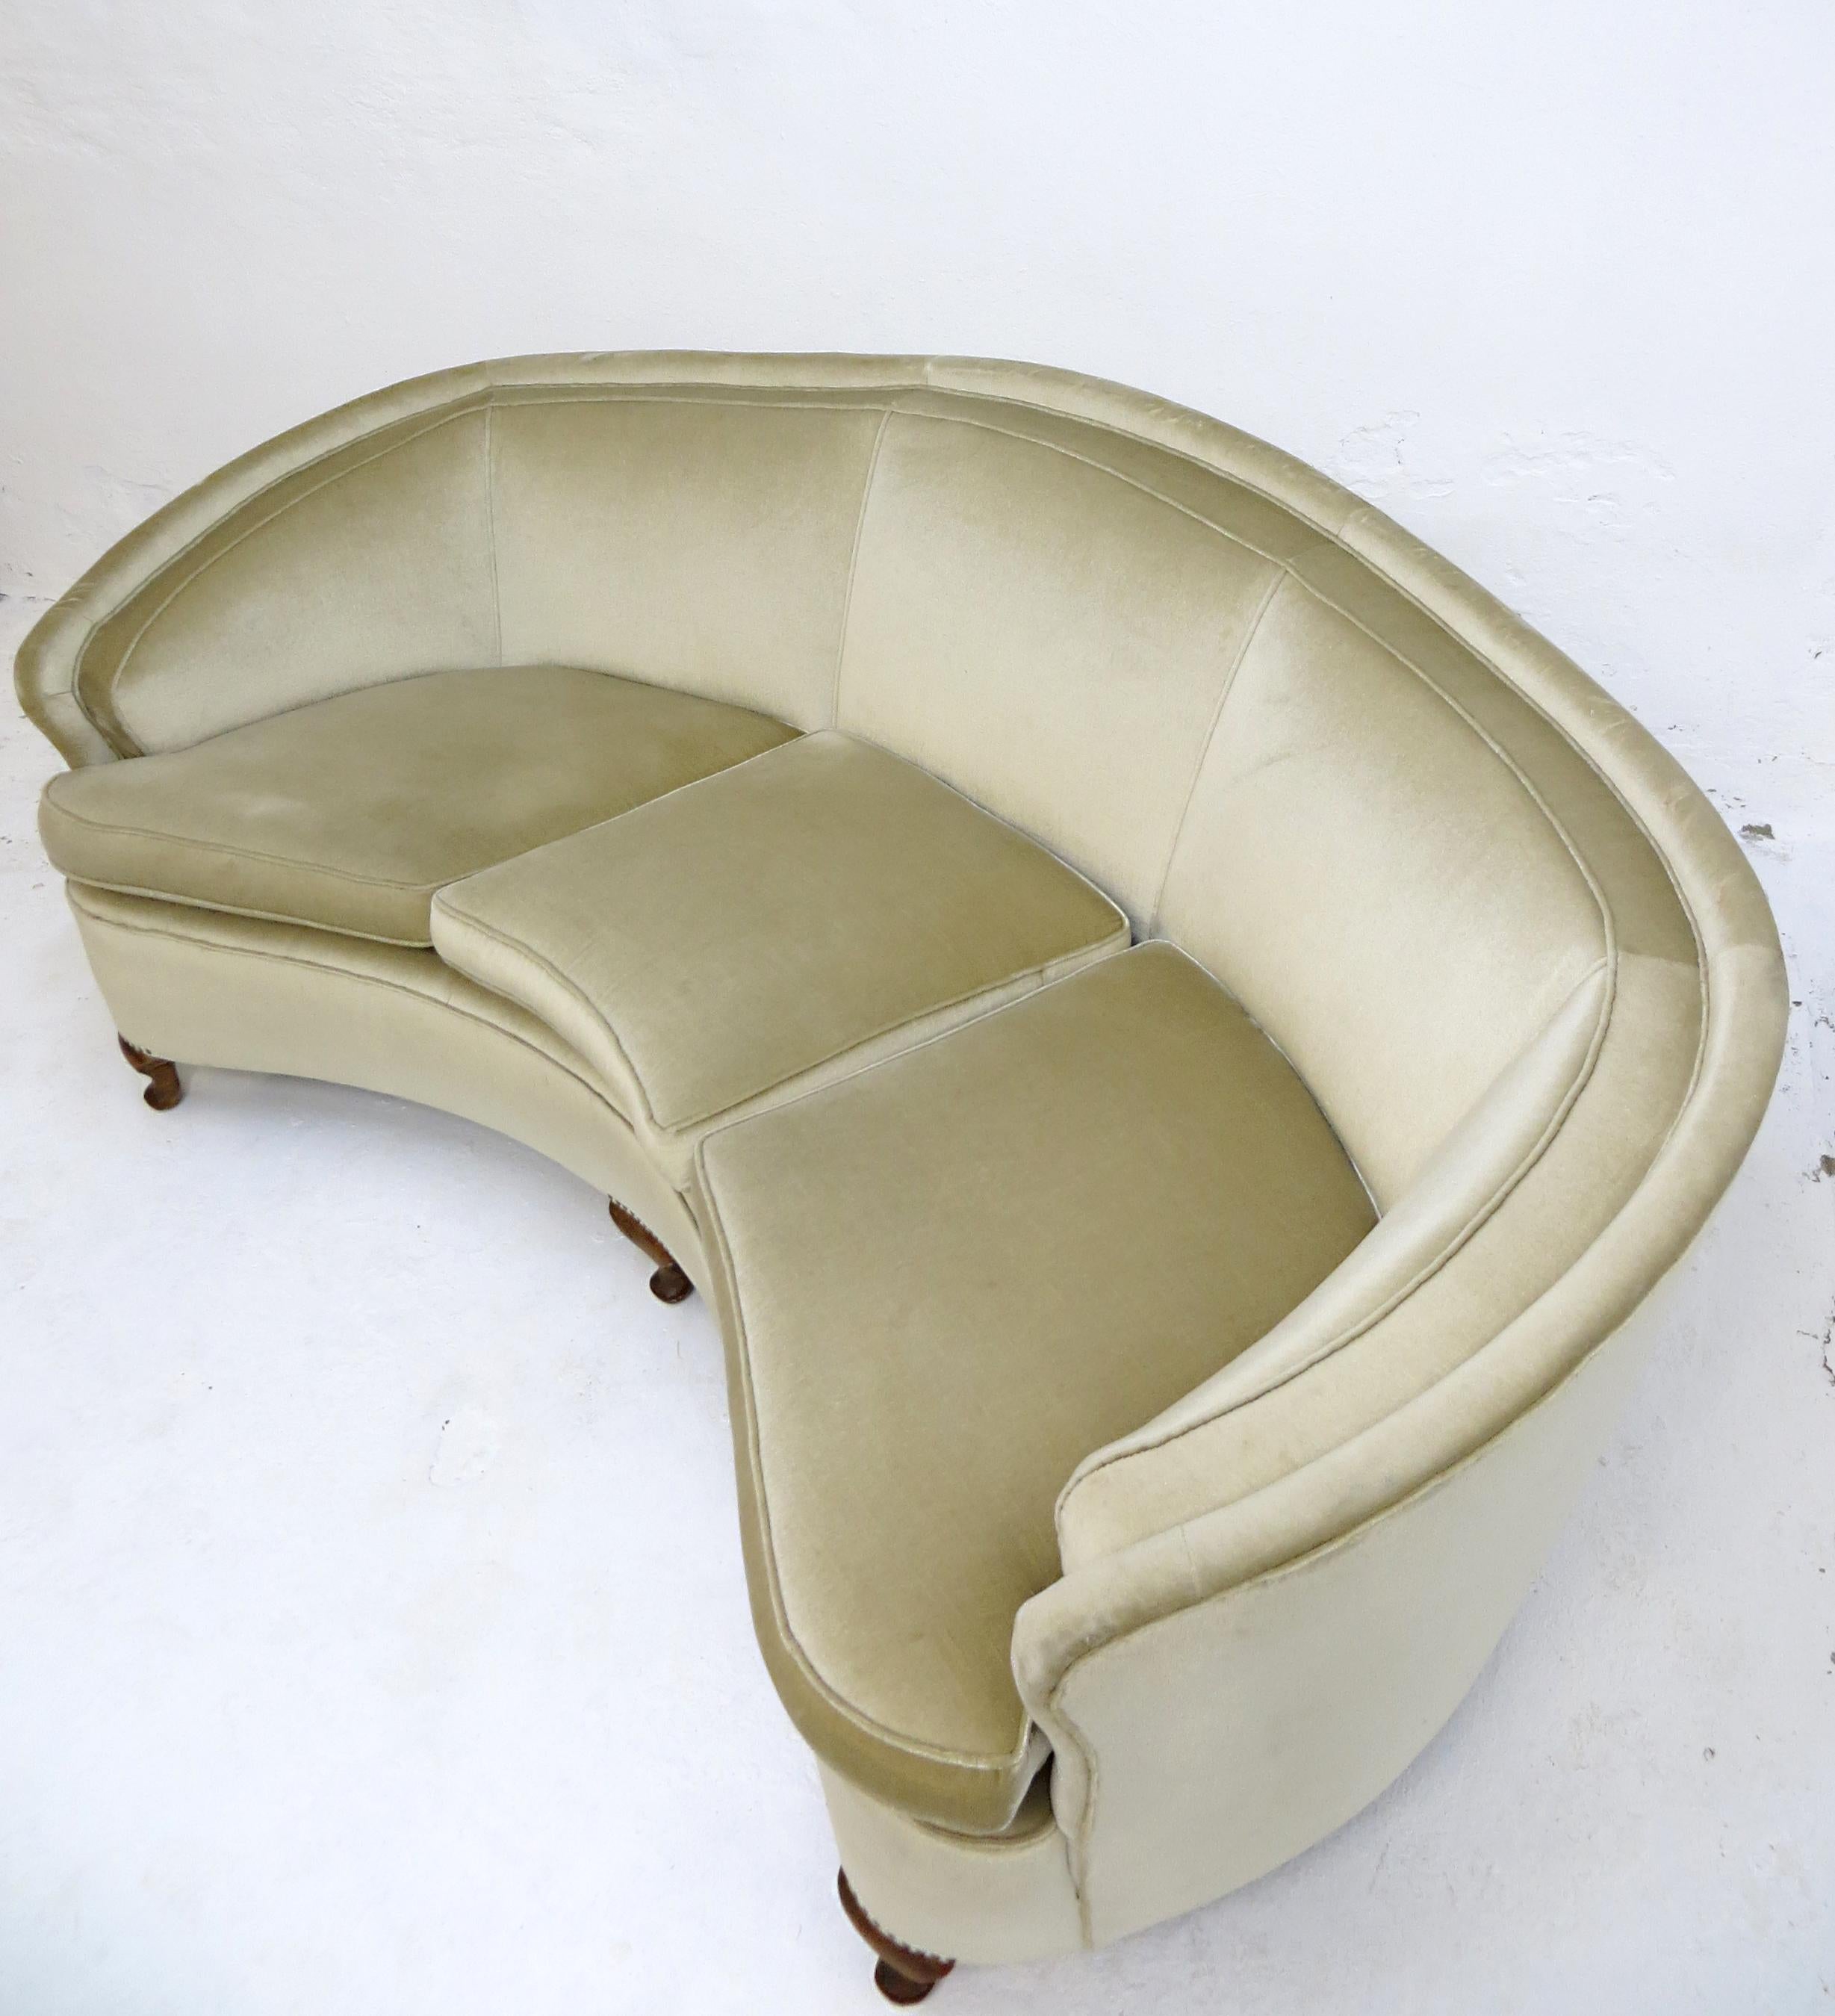 We offer you an Art Deco / Mid-Century Modern design sofa from Italy with a beautiful banana curved shaped  attributed to Gio Ponti. 
This sofa is from high-class quality. The velvet-velour / velor fabric cover in fine, timeless and luxury beige is